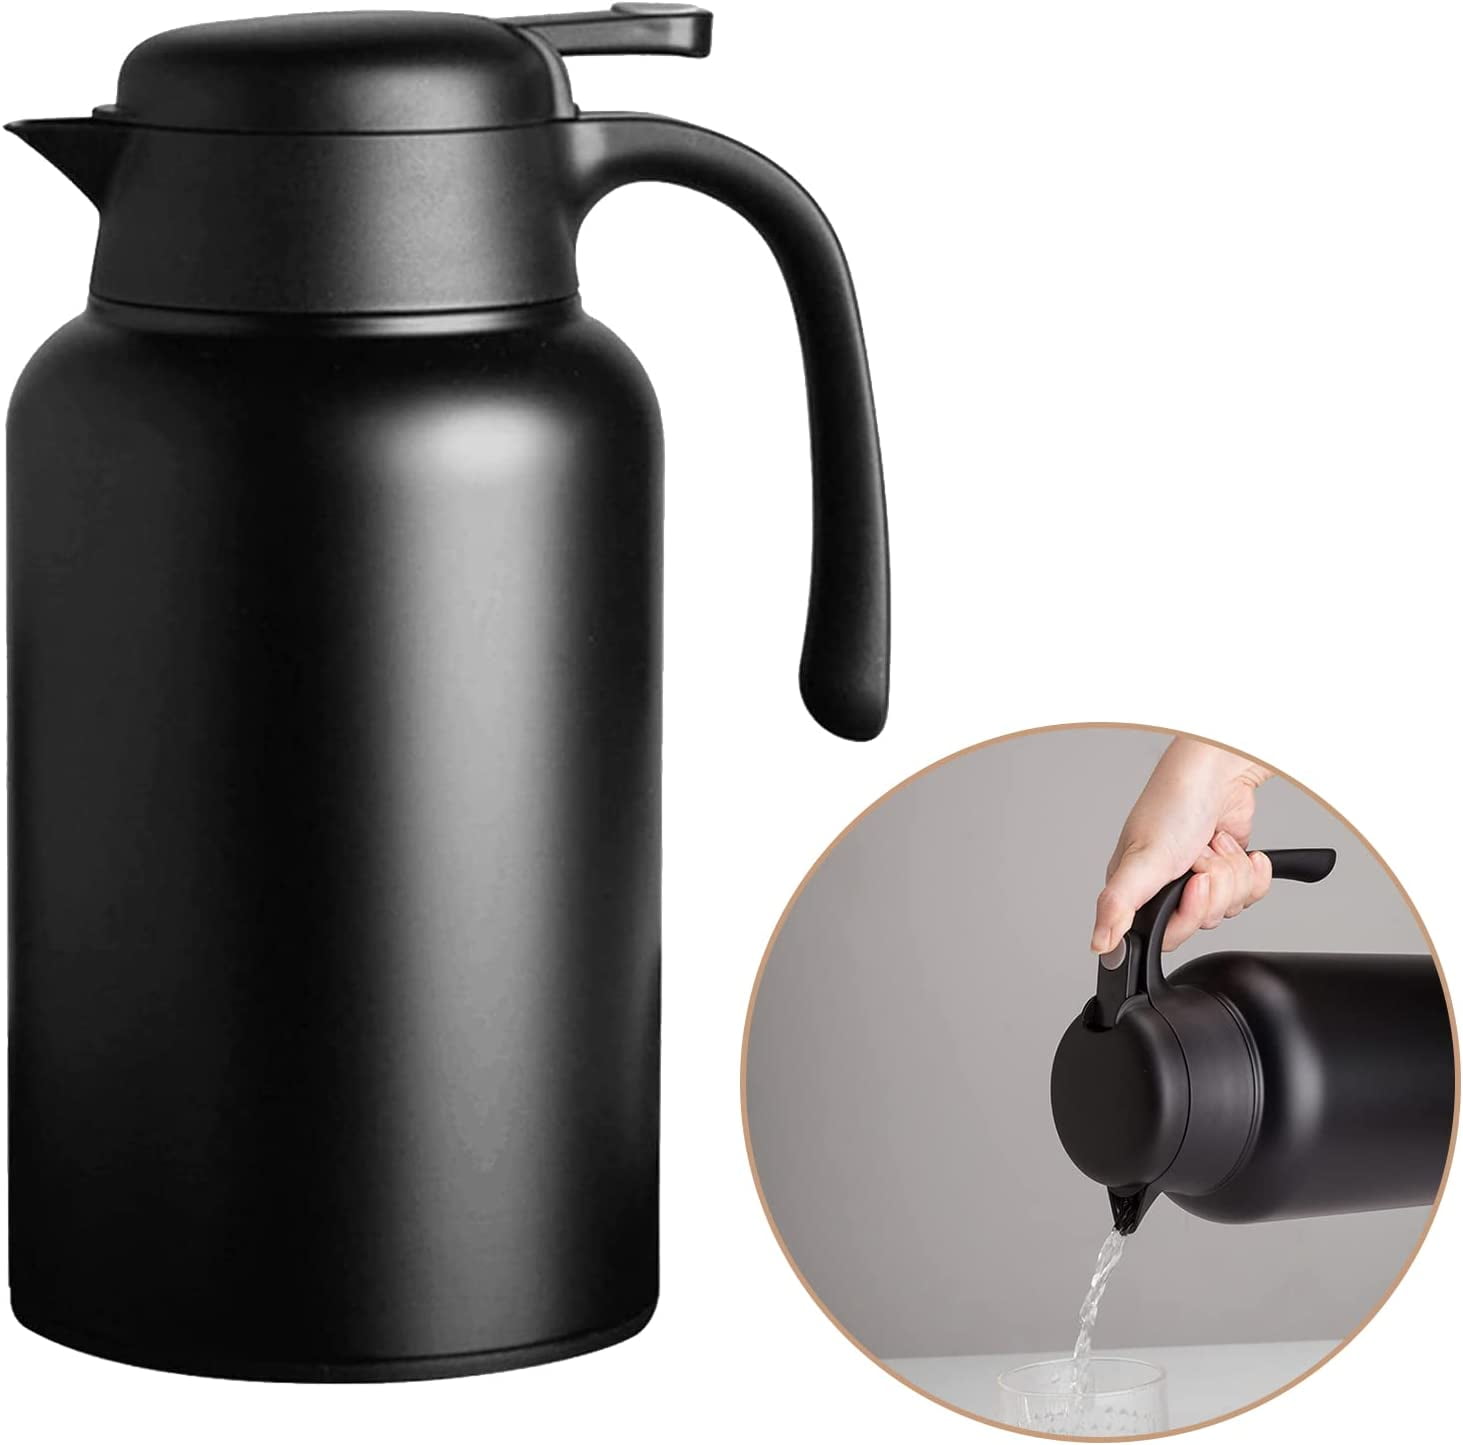 Whiterhino 27oz Thermal Coffee Carafe for Keeping Hot,White Small Coffee Thermos with Lid, Black